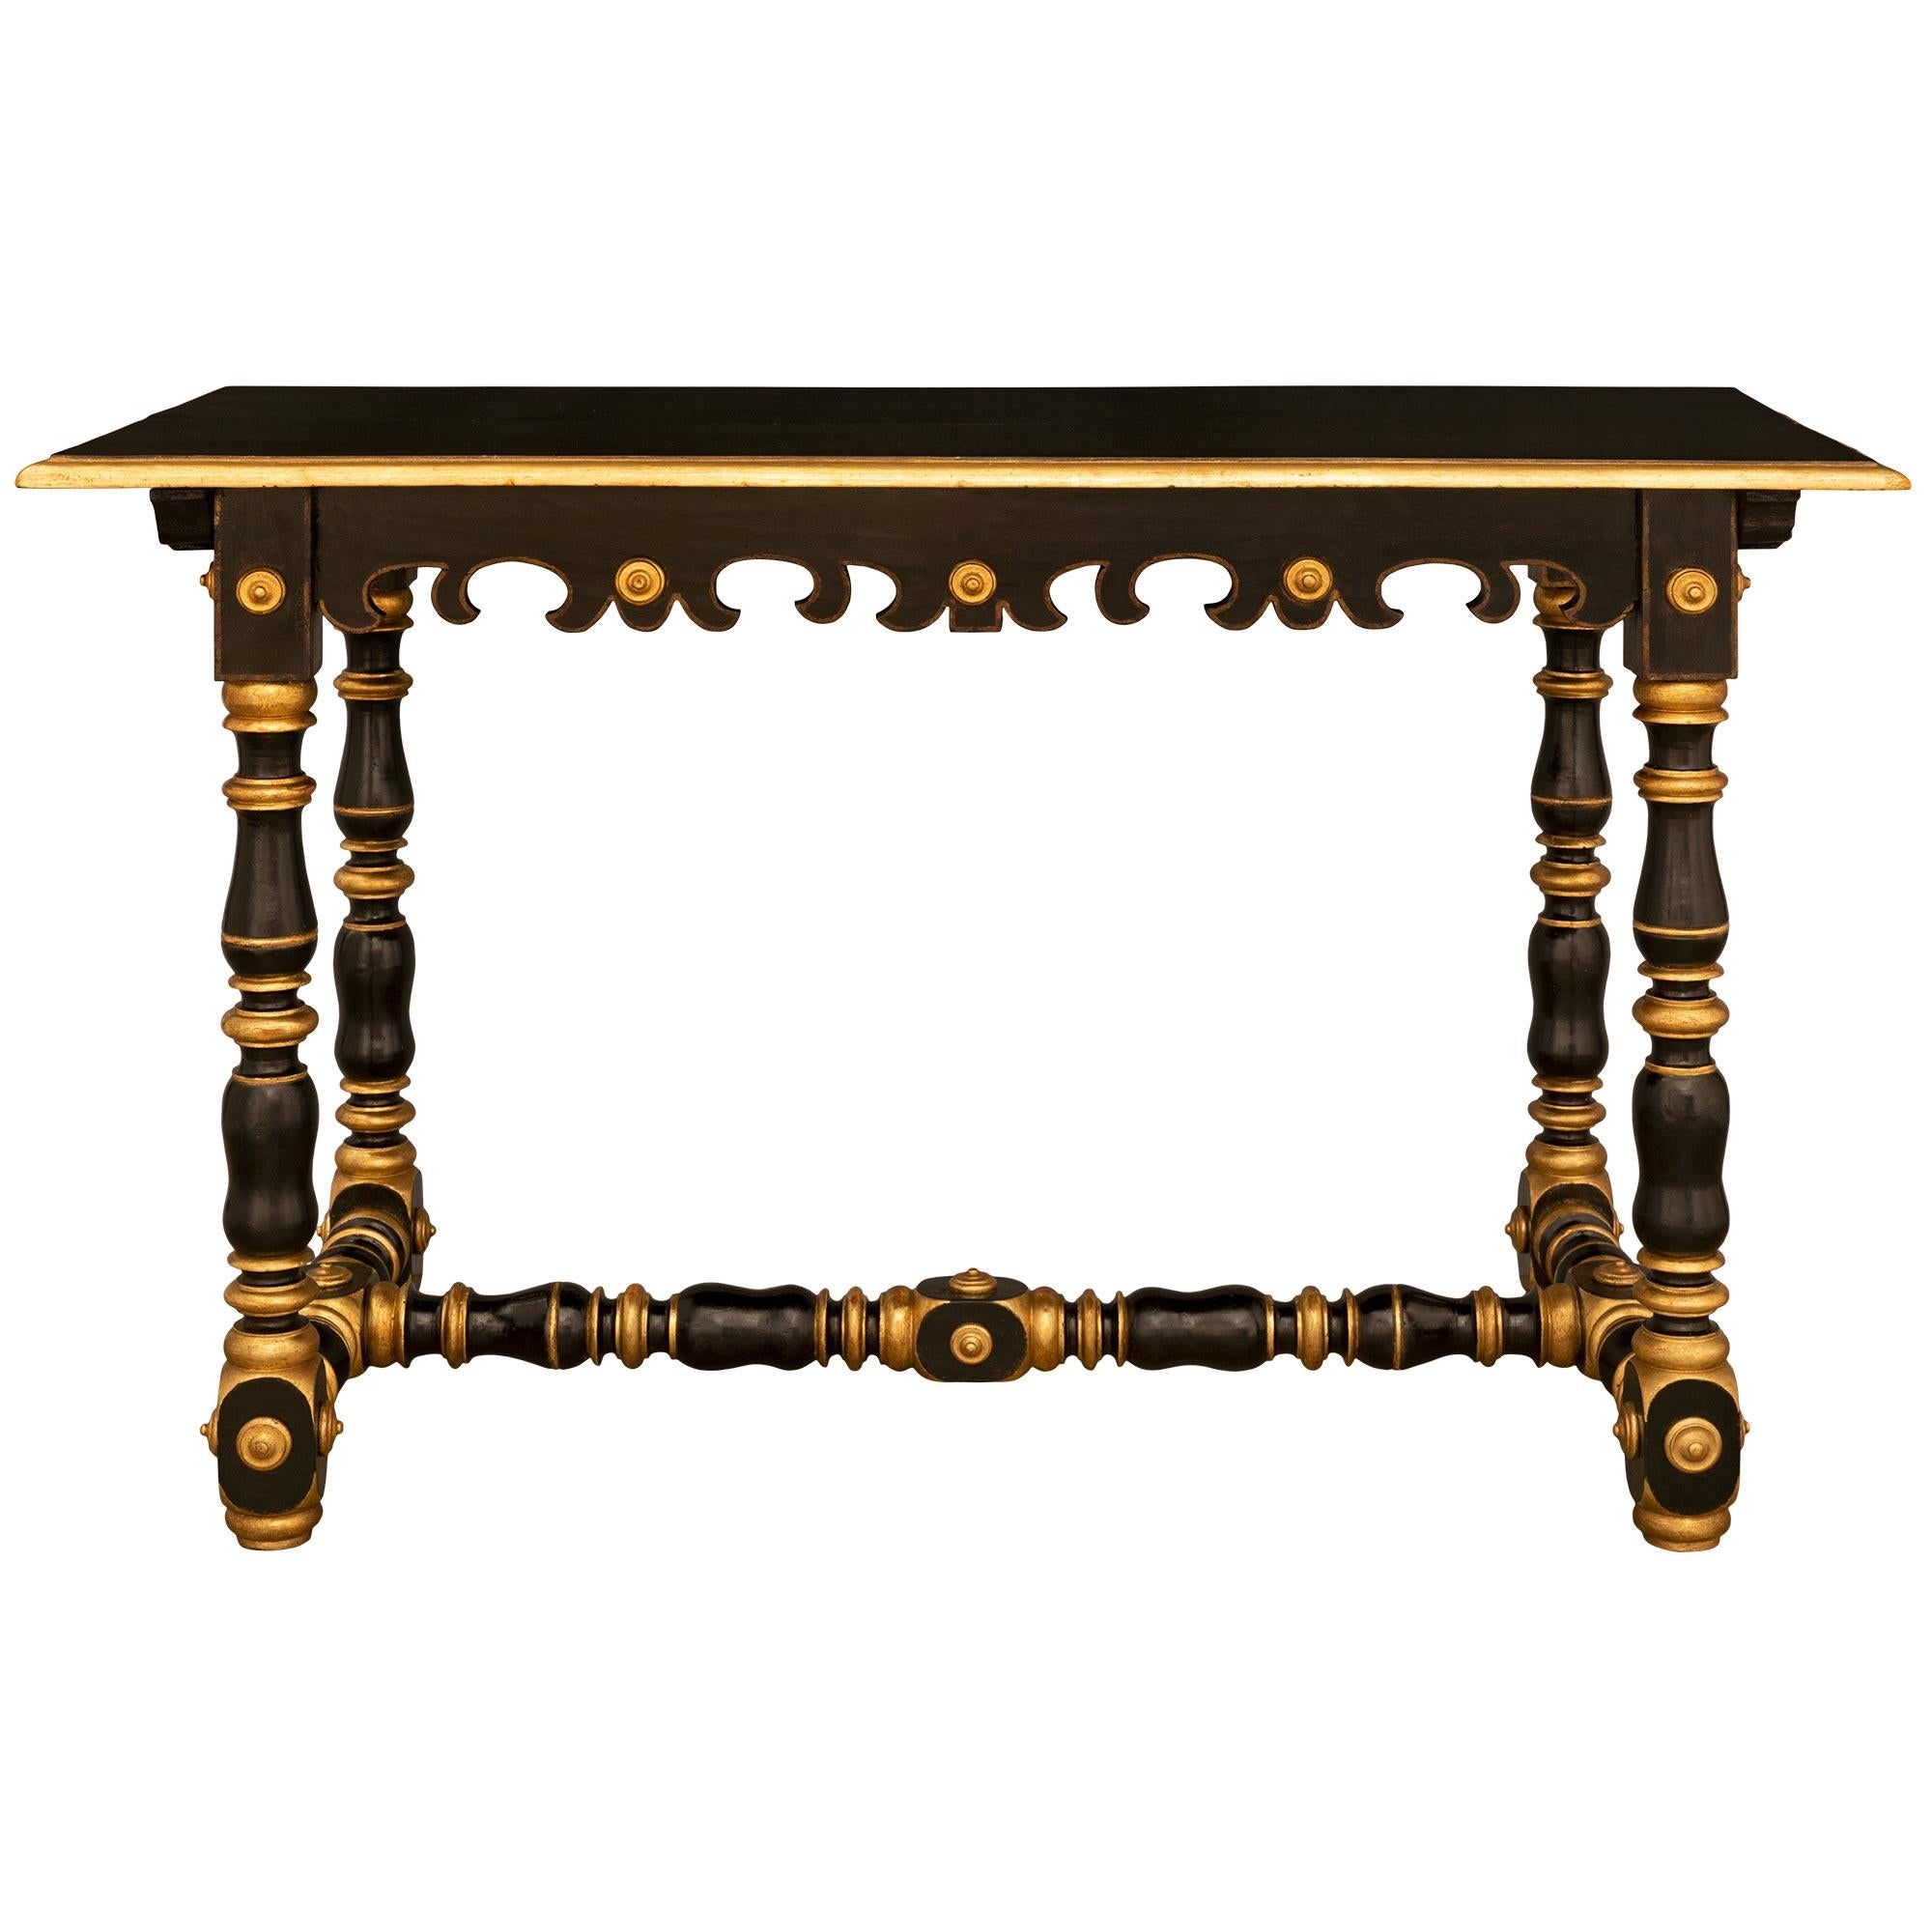 Italian 18th Century Louis XIV Period Fruitwood & Giltwood Side/Center Table For Sale